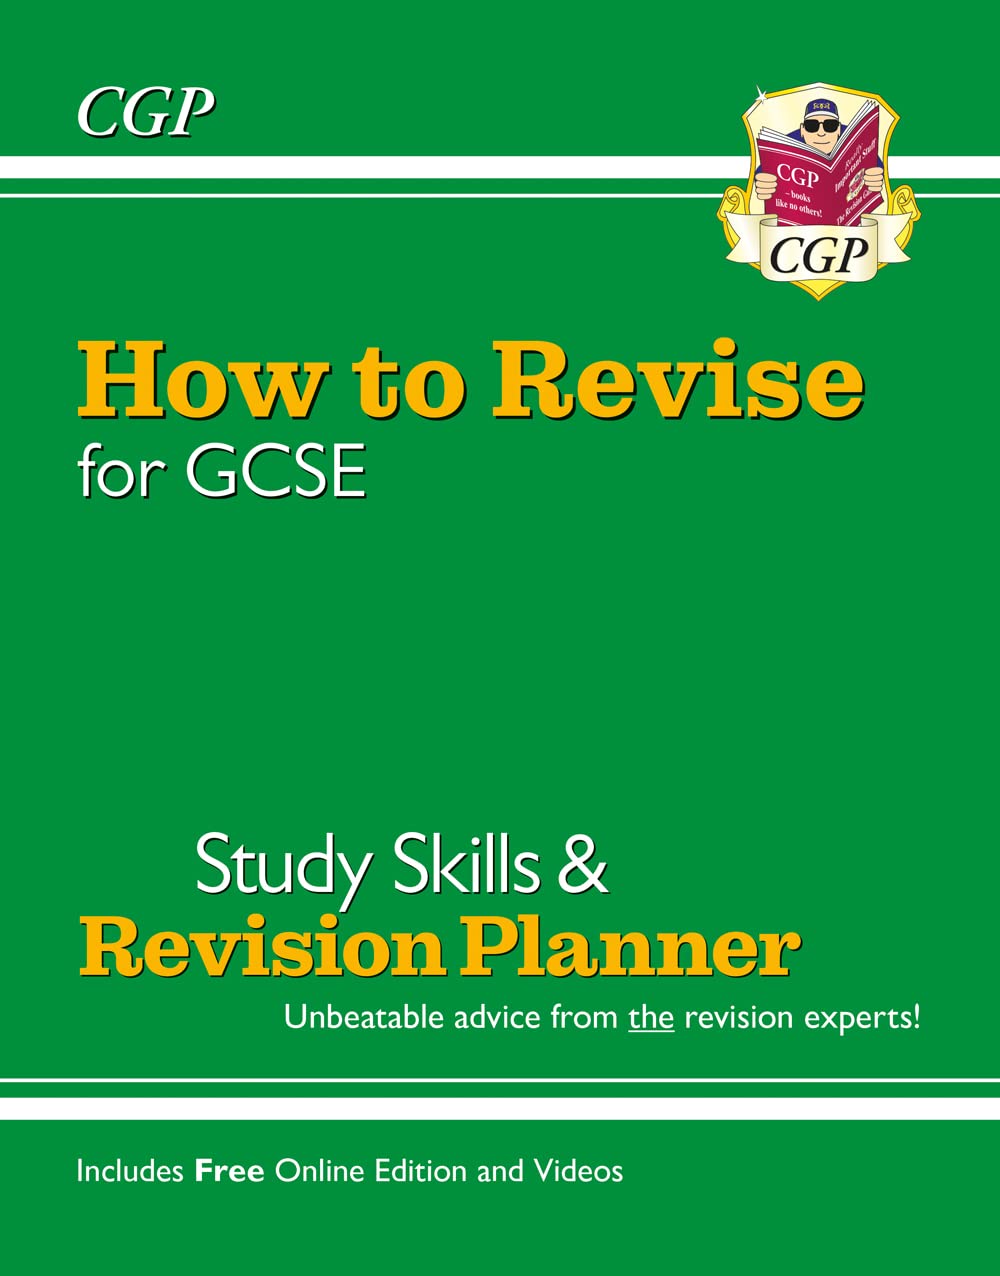 How to Revise for GCSE: Study Skills & Planner